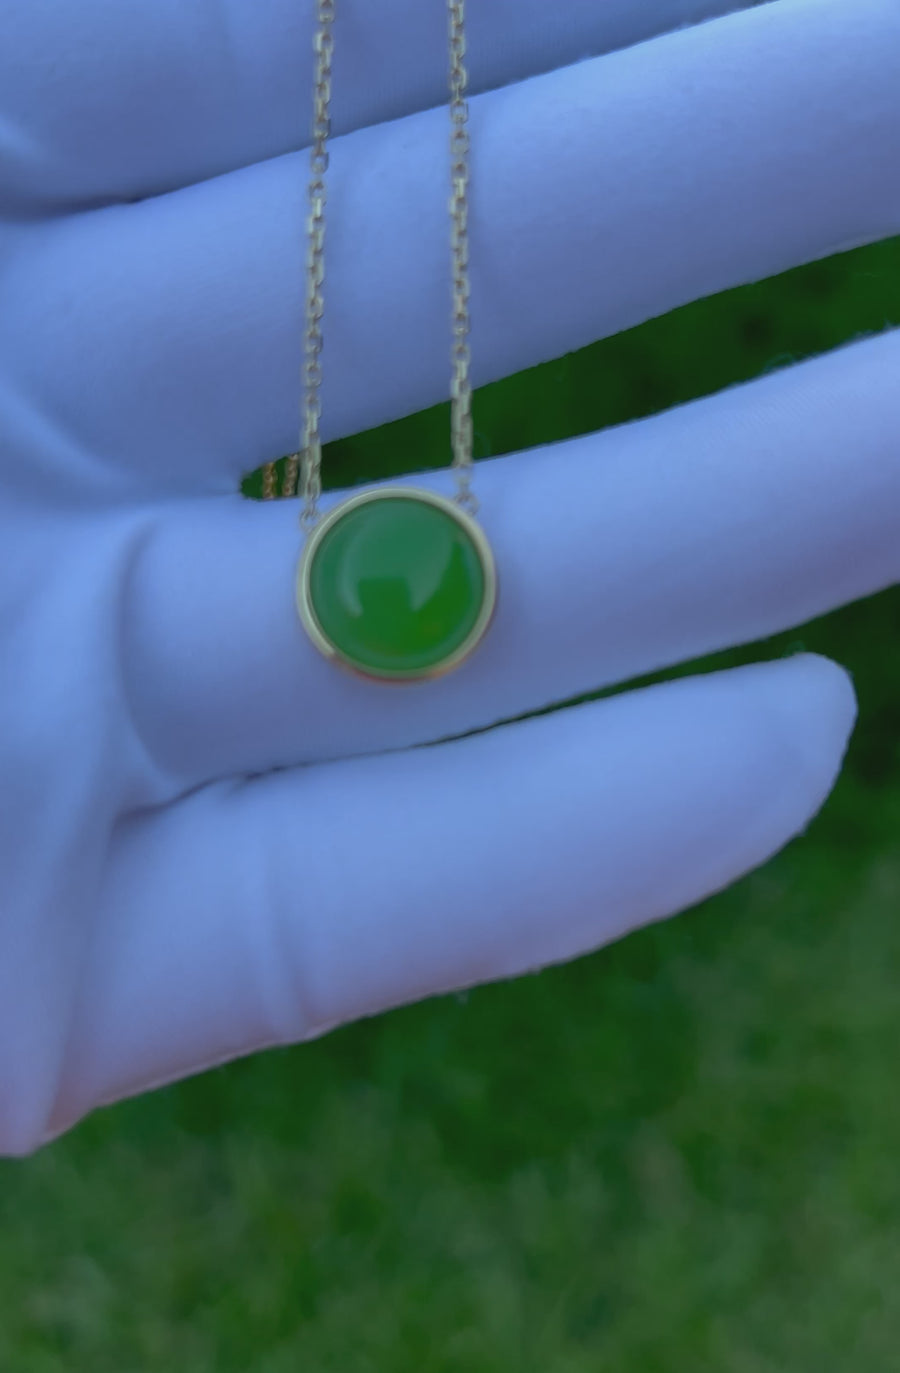 14K Gold Genuine Very High-quality Green Apple Green Jade Circle Pendant Necklace